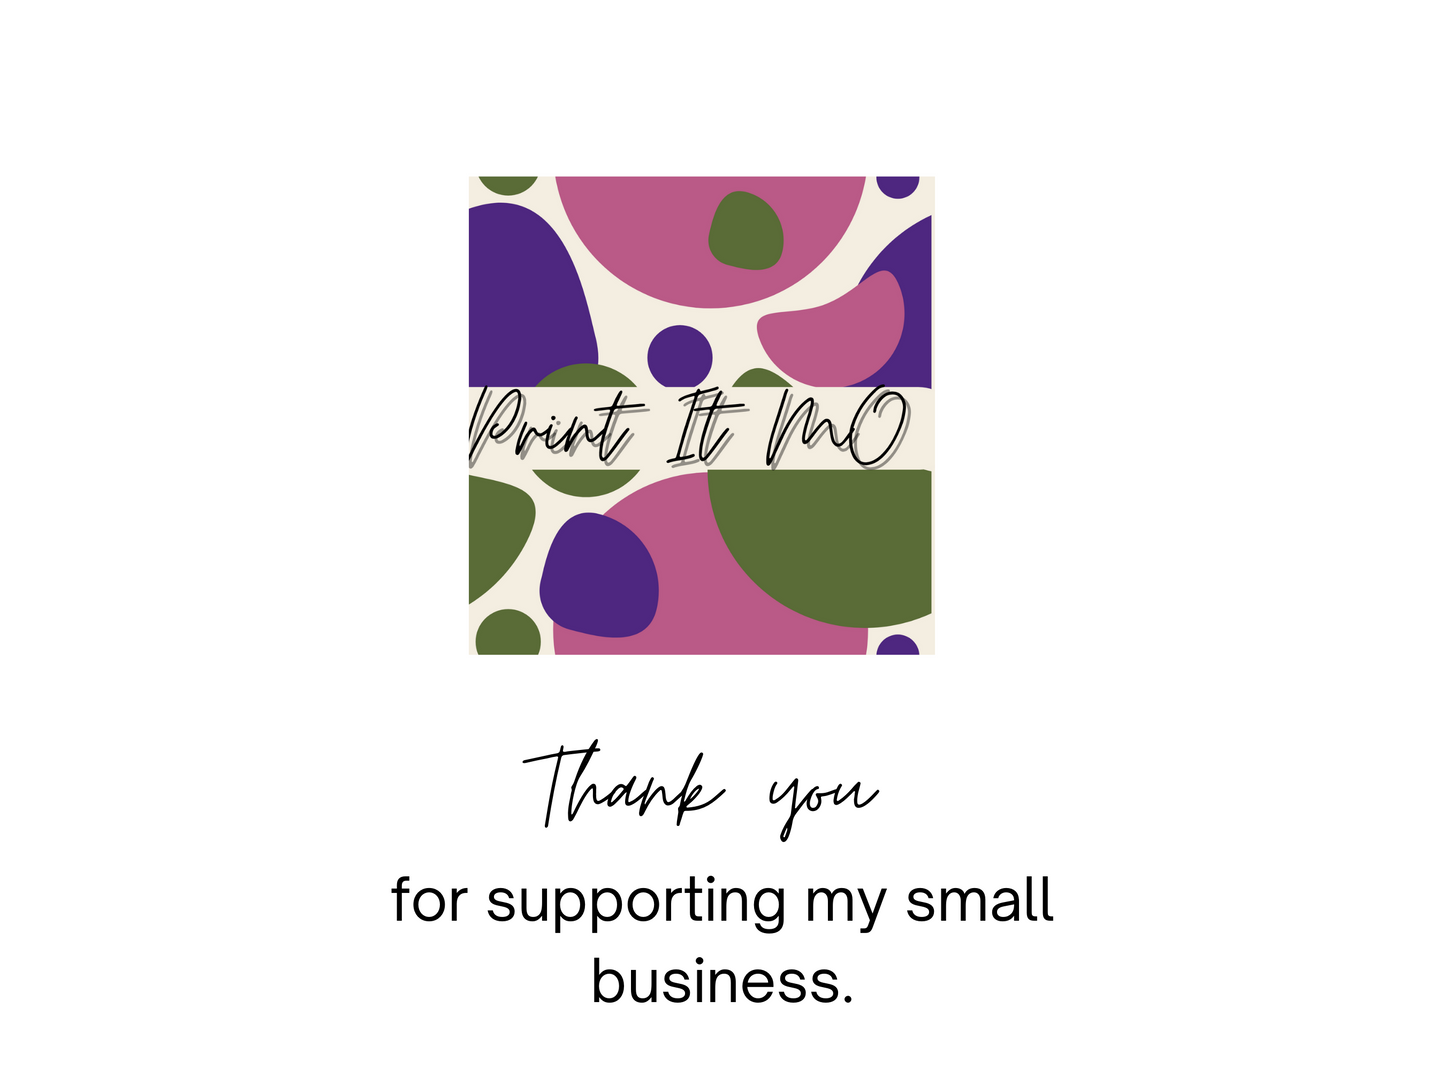 Print It Mo logo with thank you message.